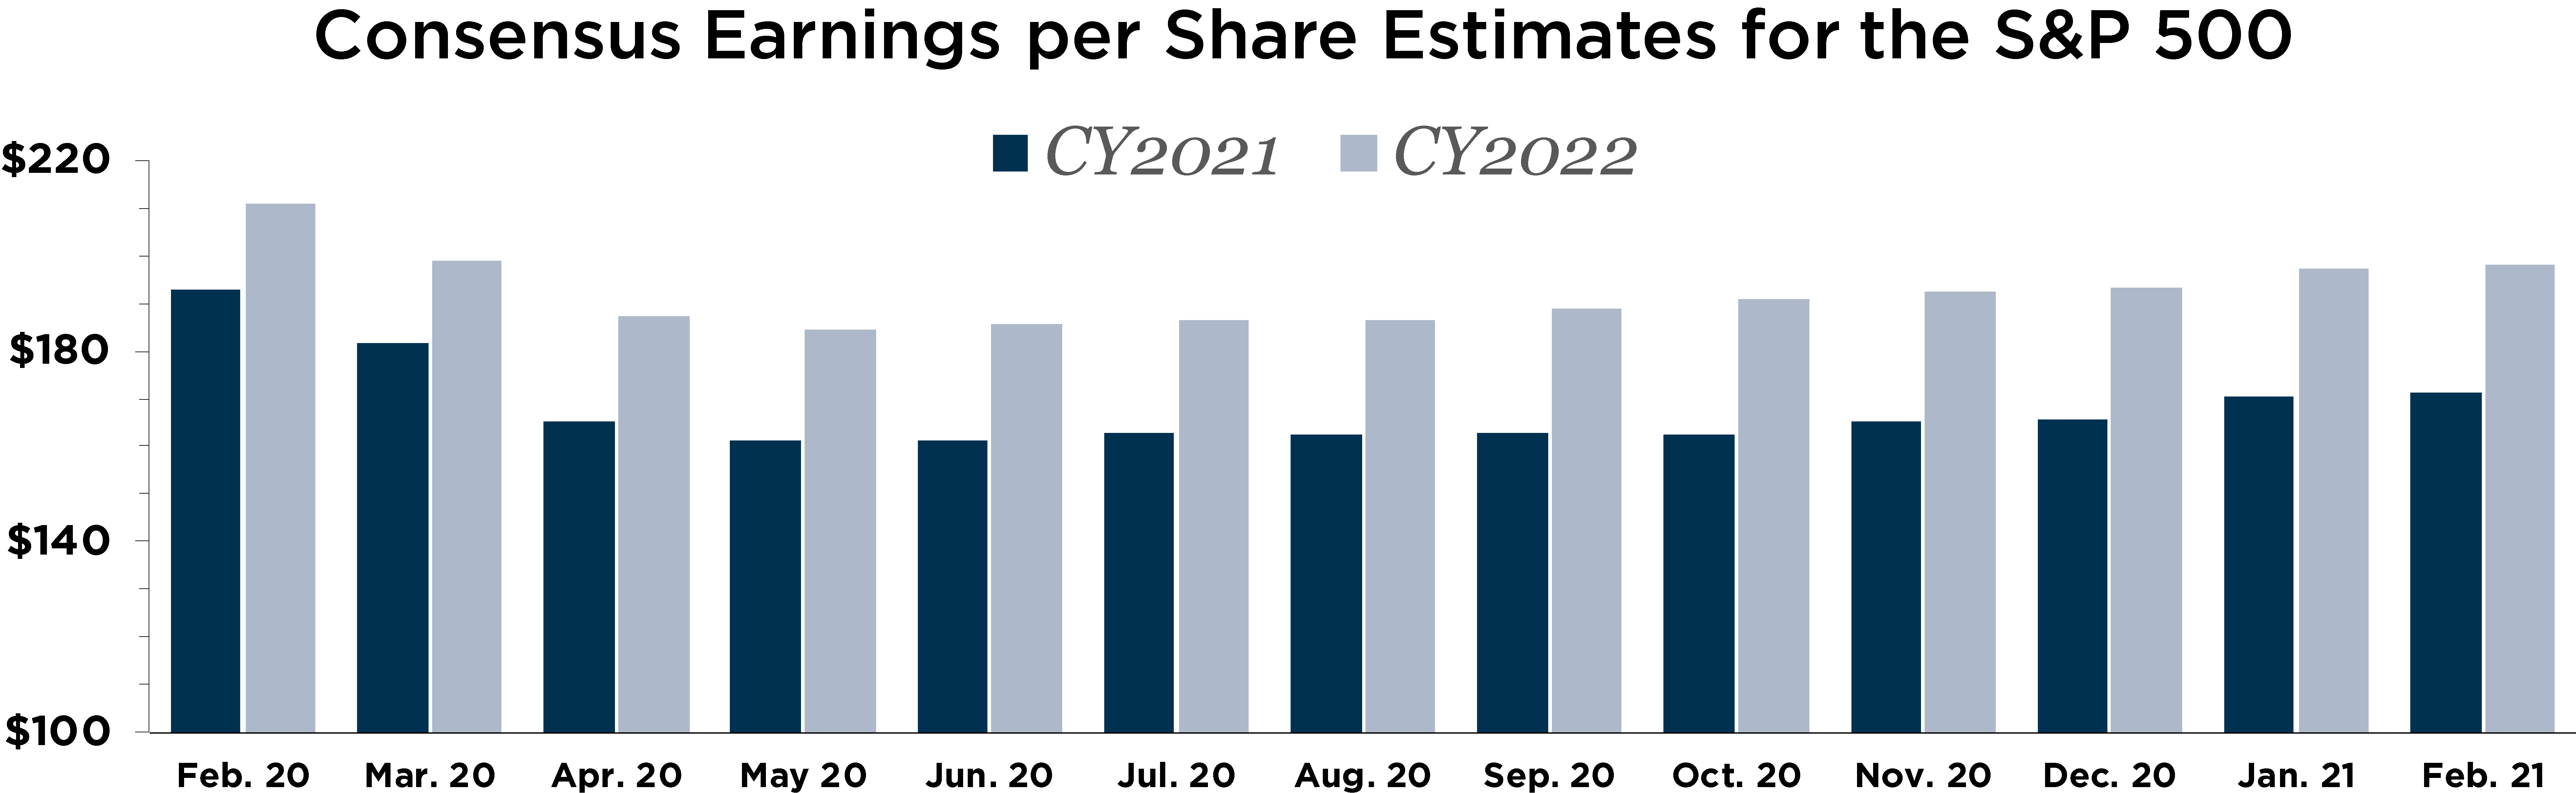 Graph depicting consensus earnings per share estimates for the S&P 500